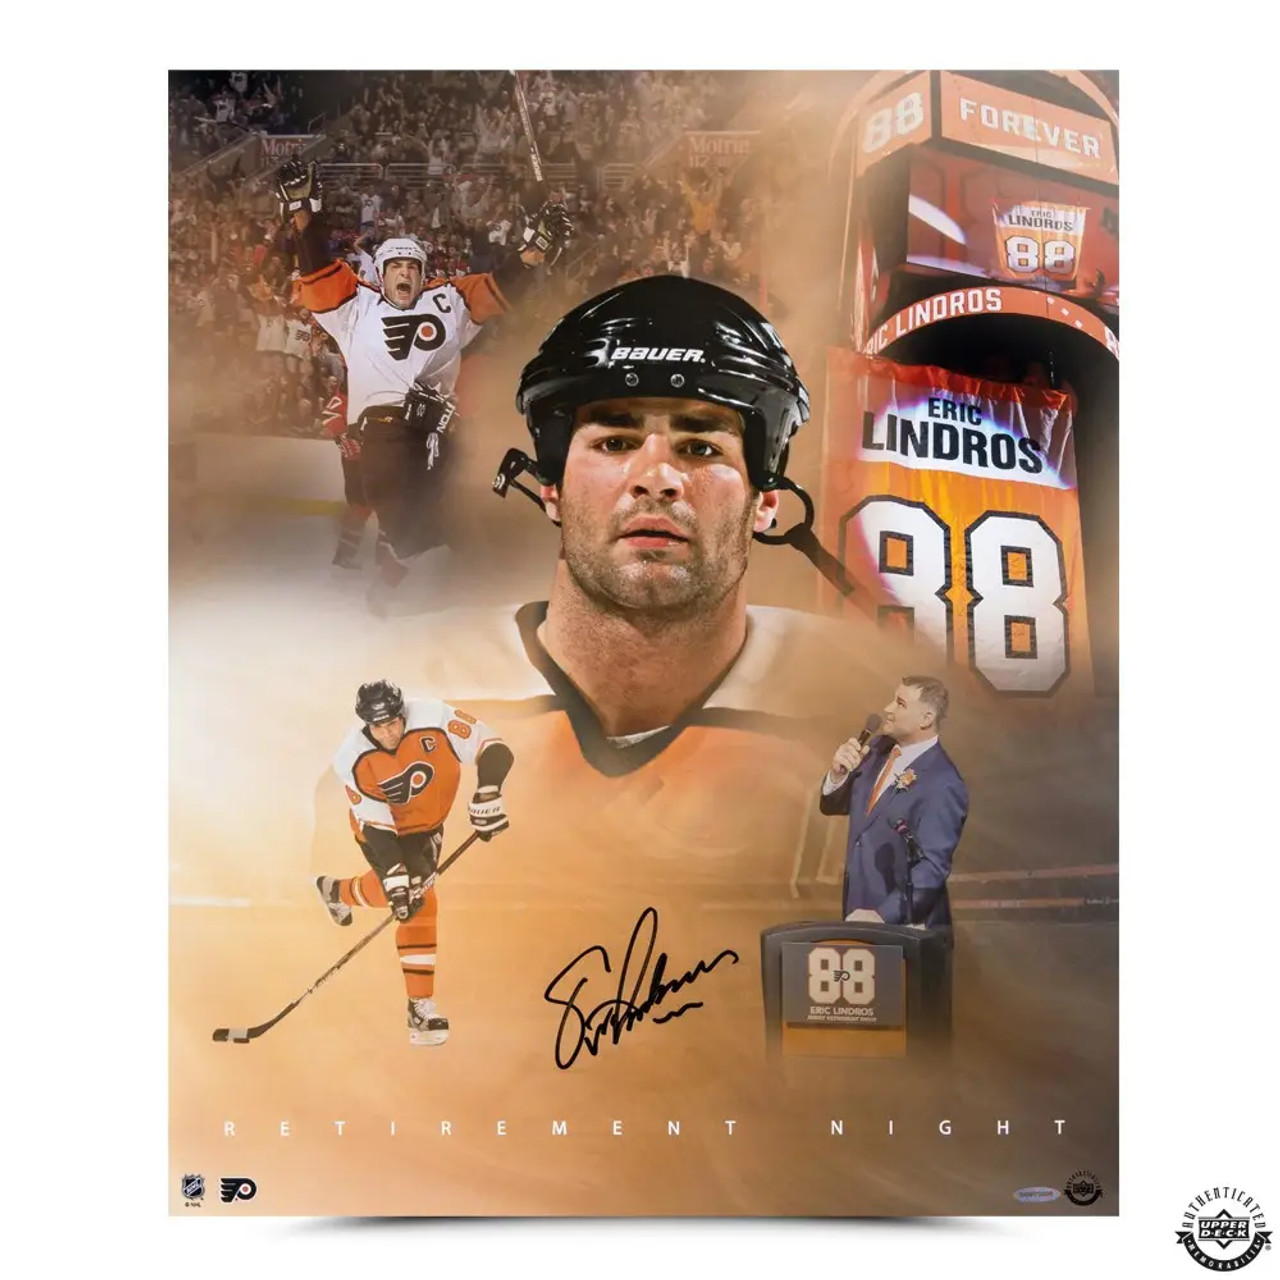 Eric Lindros Signed Flyers Jersey (PSA)